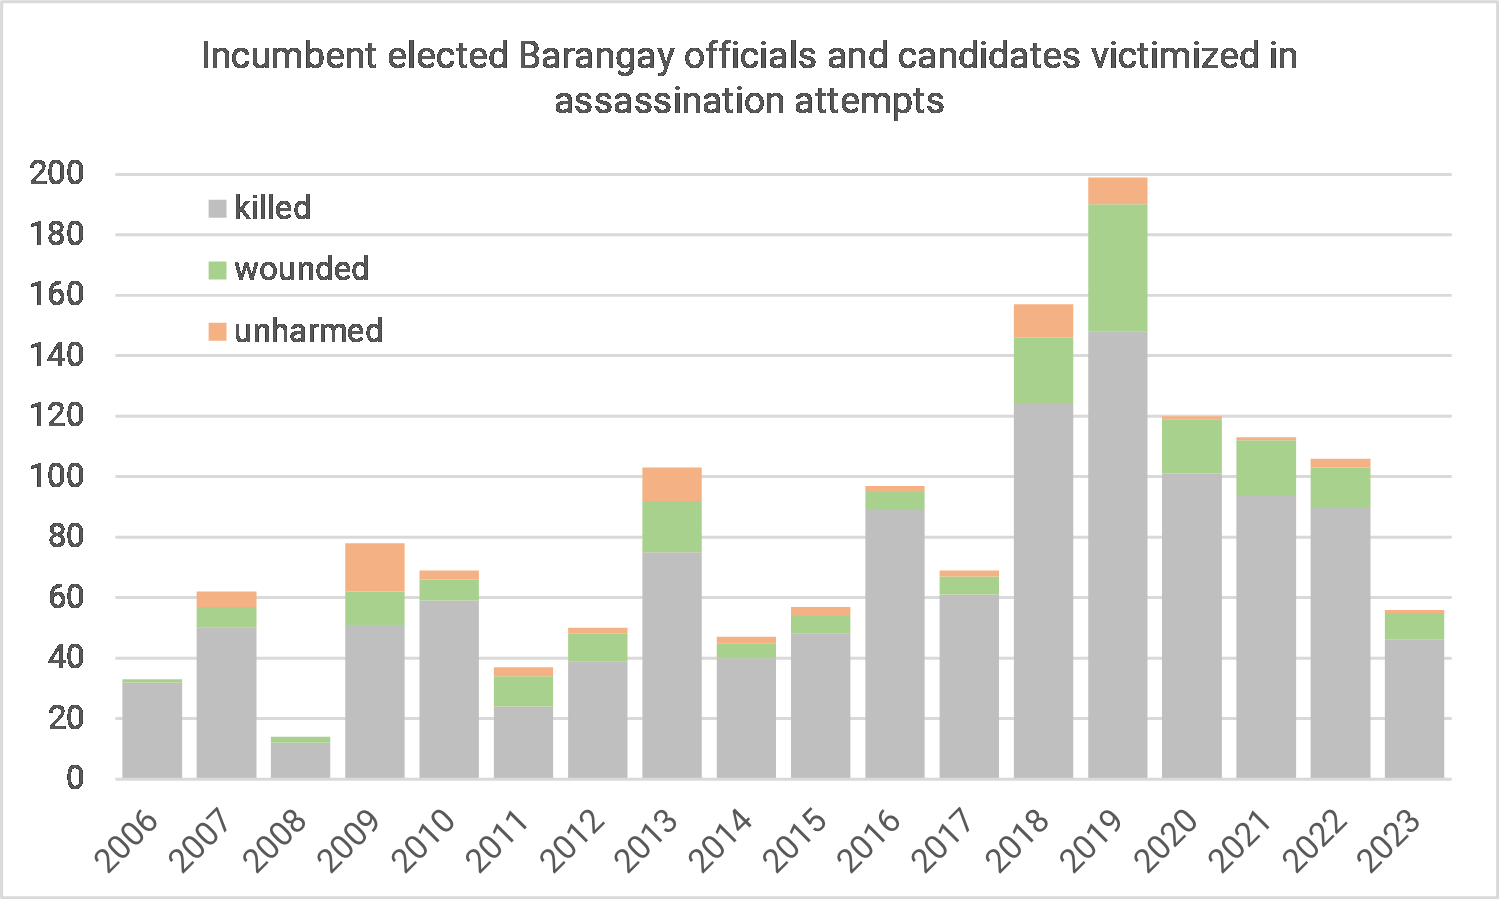 Table showing local government officials and candidates on barangay level victimized in assassination attempts, per year: 2006: 32 killed, 1 wounded 2007: 50 killed, 7 wounded, 5 unharmed 2008: 12 killed, 2 wounded 2009: 51 killed, 11 wounded, 16 unharmed 2010: 59 killed, 7 wounded, 3 unharmed 2011: 24 killed, 10 wounded, 3 unharmed 2012: 39 killed, 9 wounded, 2 unharmed 2013: 75 killed, 17 wounded, 11 unharmed 2014: 40 killed, 5 wounded, 2 unharmed 2015: 48 killed, 6 wounded, 3 unharmed 2016: 89 killed, 6 wounded, 2 unharmed 2017: 61 killed, 6 wounded, 2 unharmed 2018: 124 killed, 22 wounded, 11 unharmed 2019: 148 killed, 42 wounded, 9 unharmed 2020: 101 killed, 18 wounded, 1 unharmed 2021: 94 killed, 18 wounded, 1 unharmed 2022: 90 killed, 13 wounded, 3 unharmed 2023: 46 killed, 9 wounded, 1 unharmed